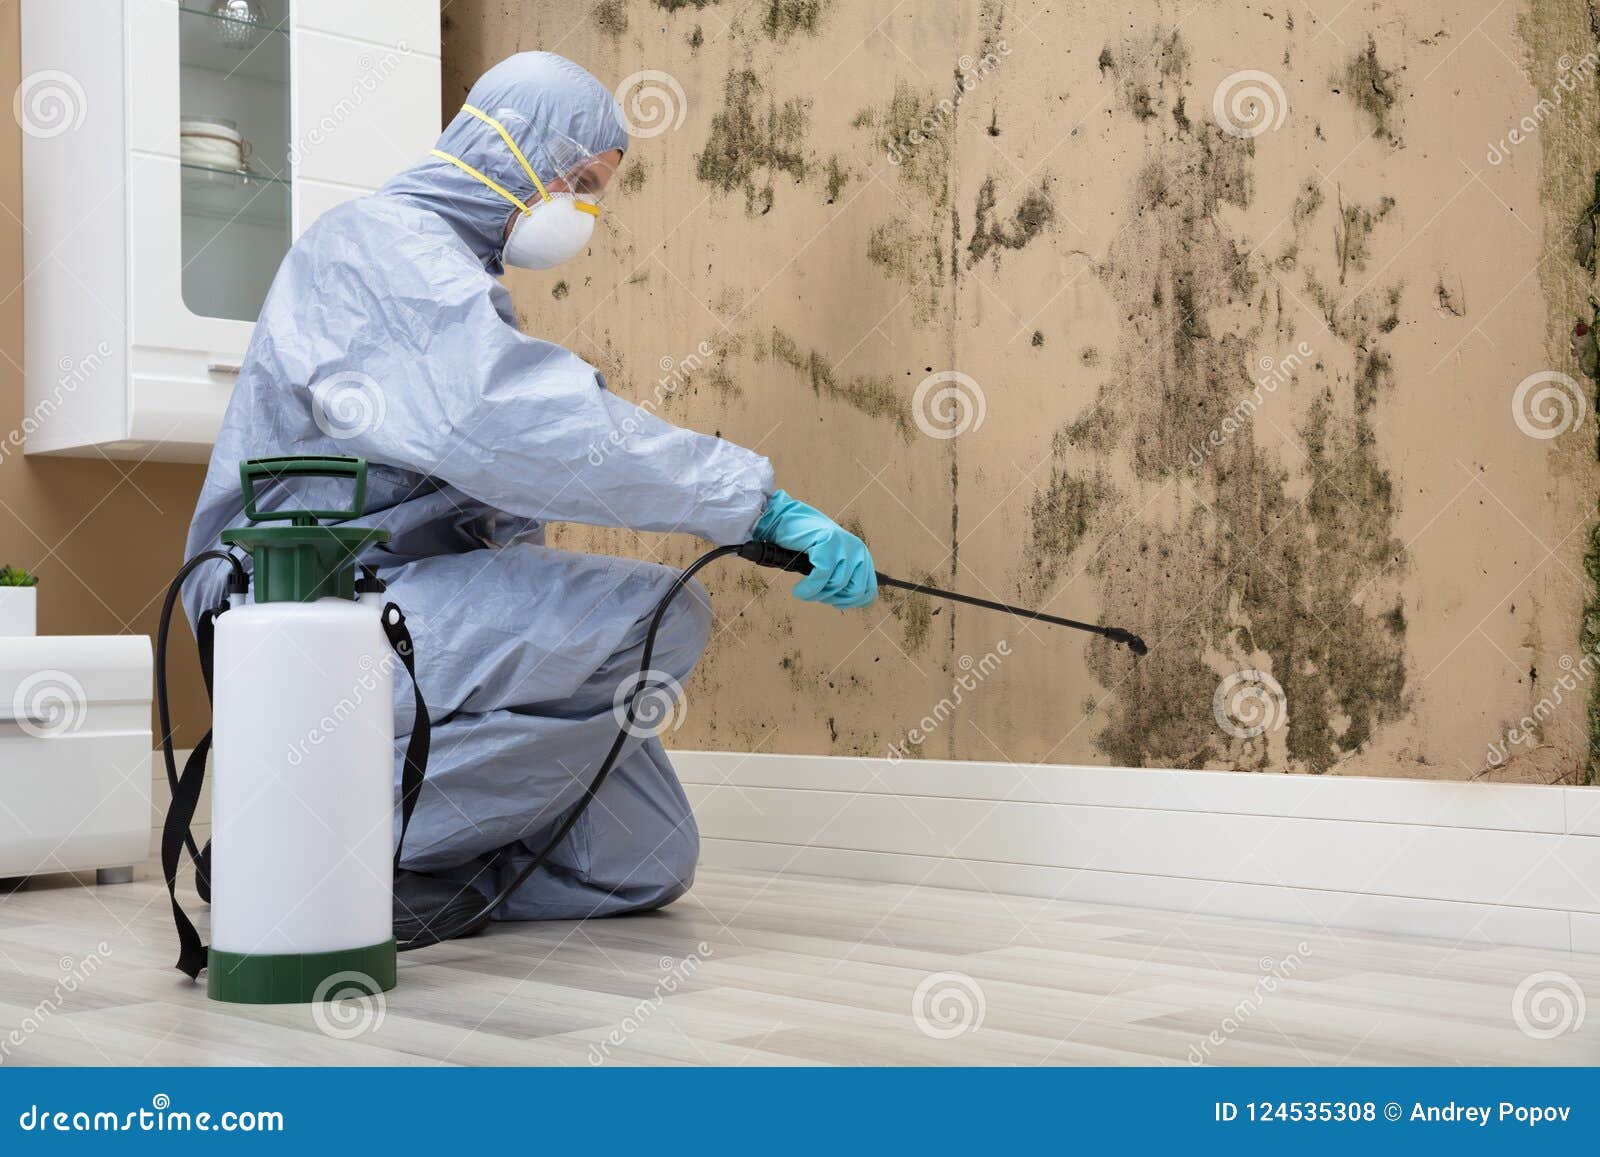 pest control worker spraying pesticide on wall